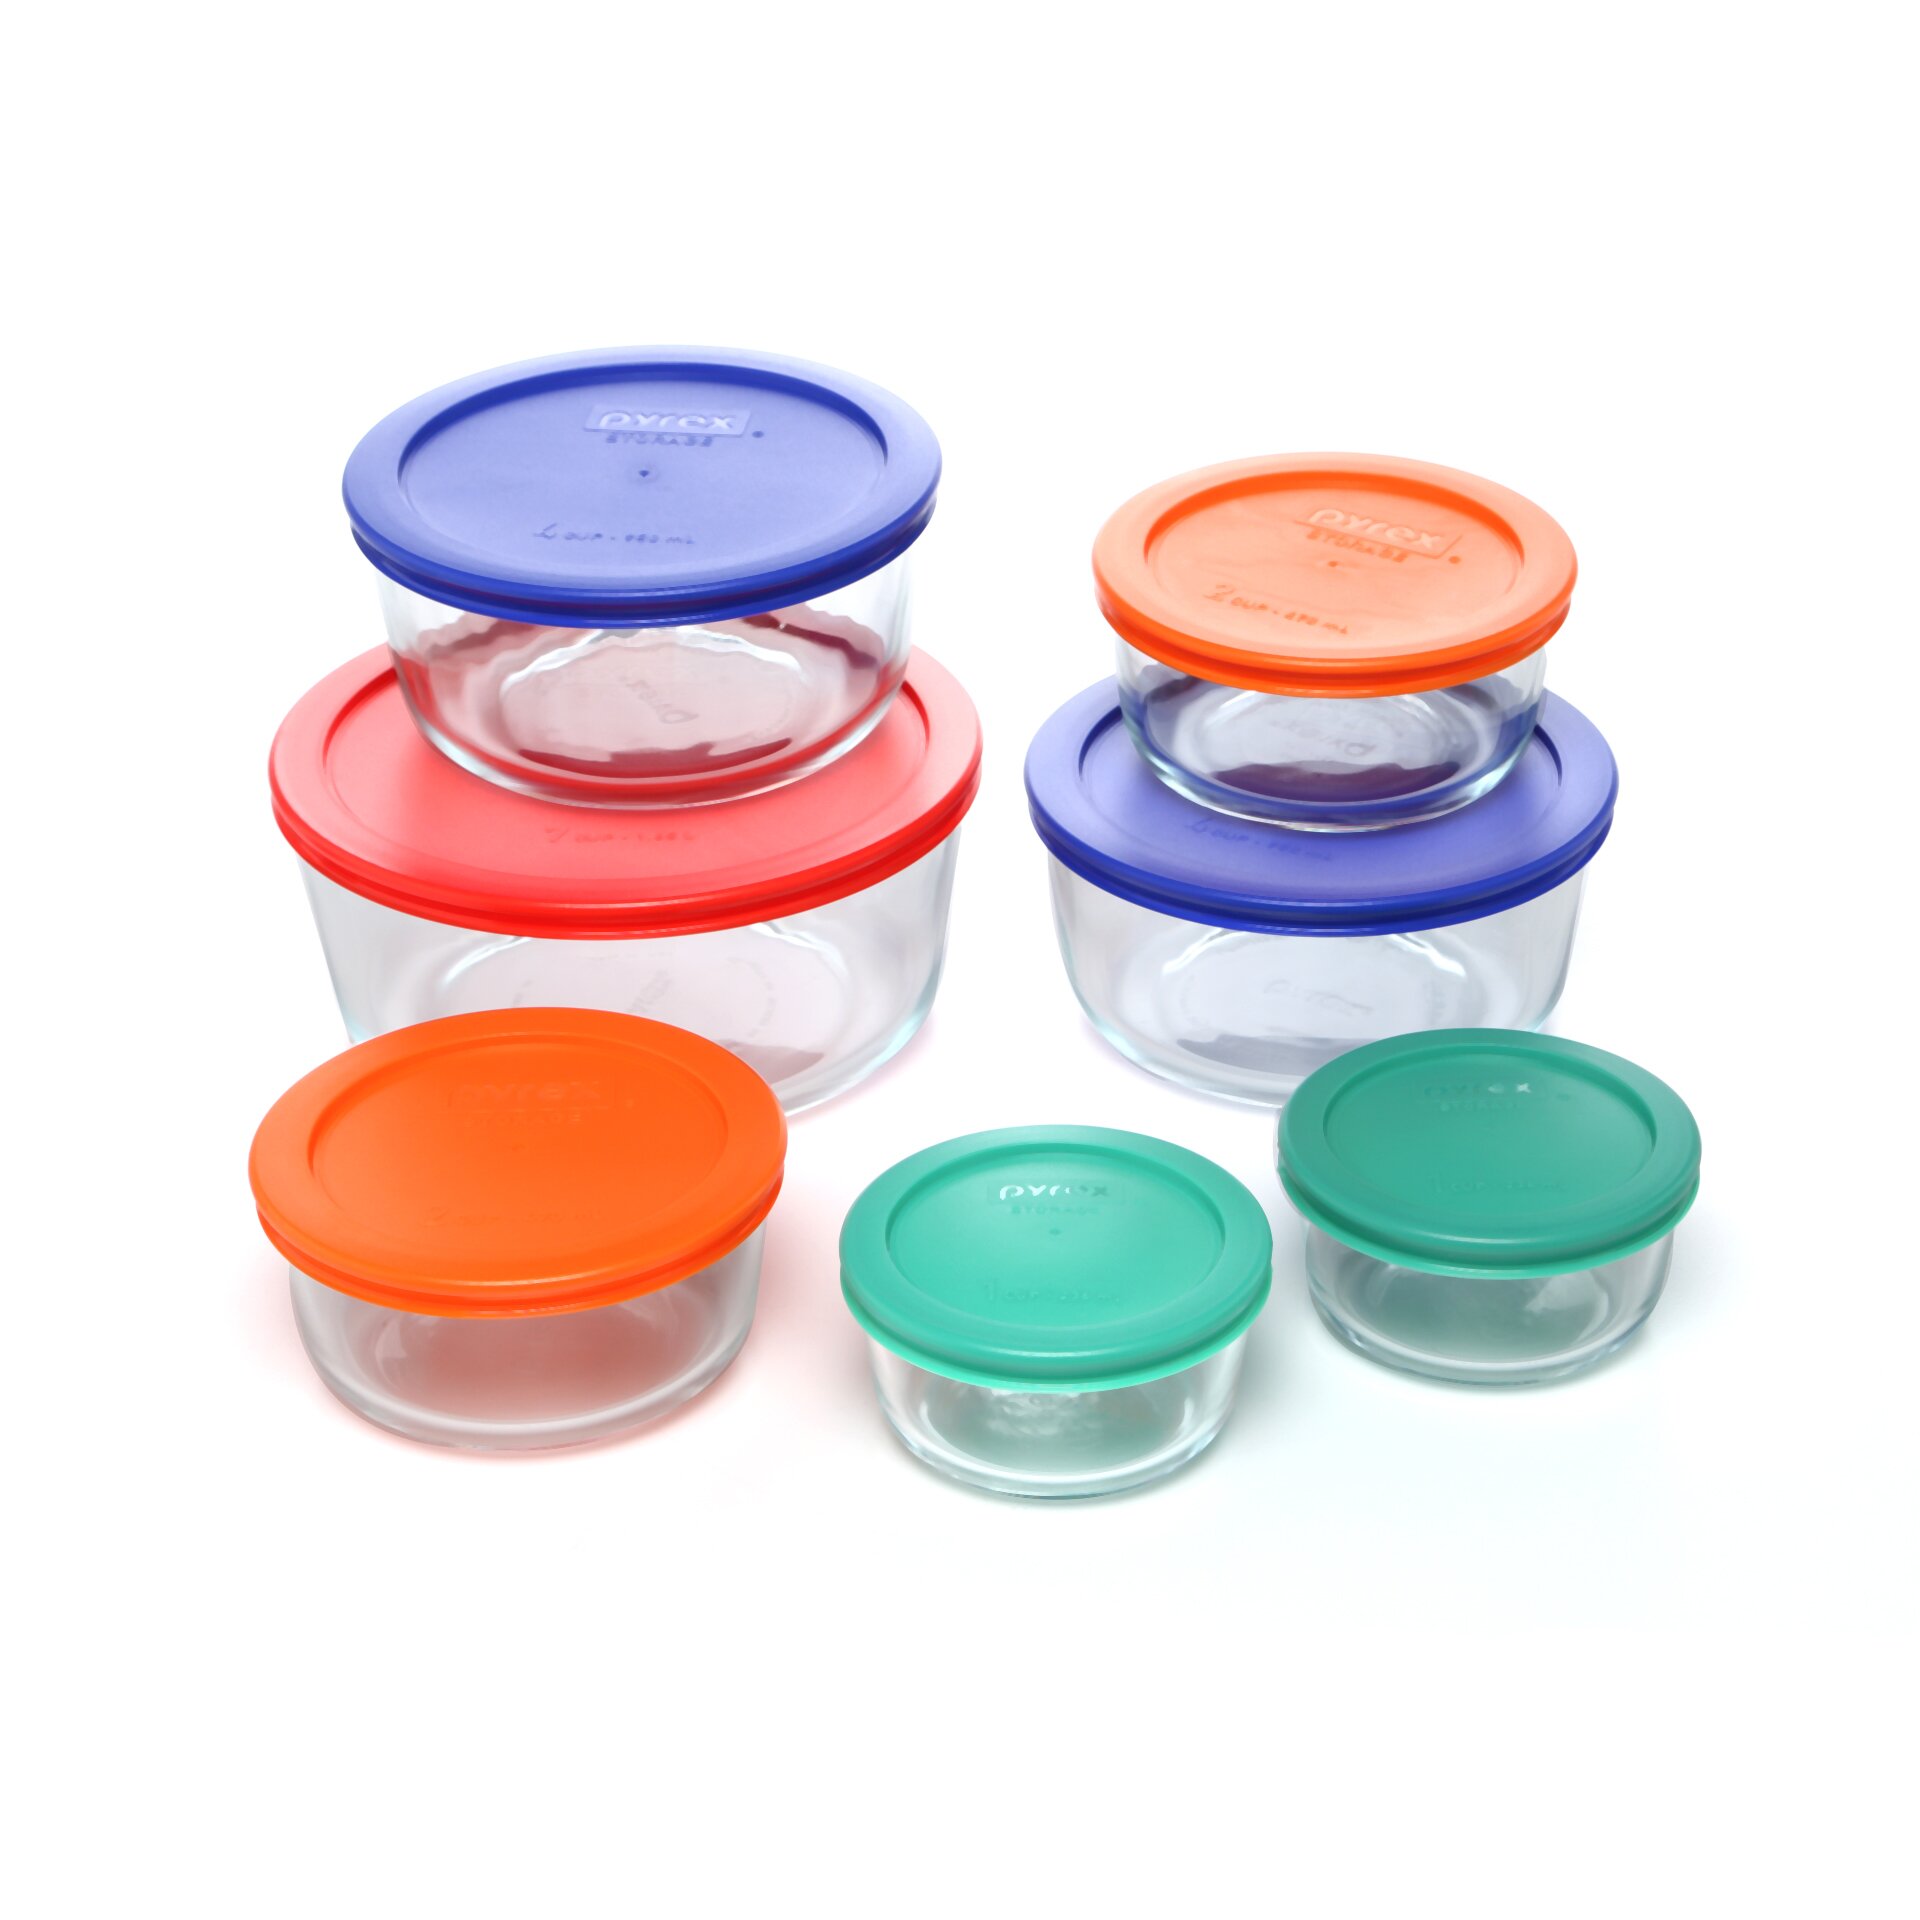 Pyrex food containers